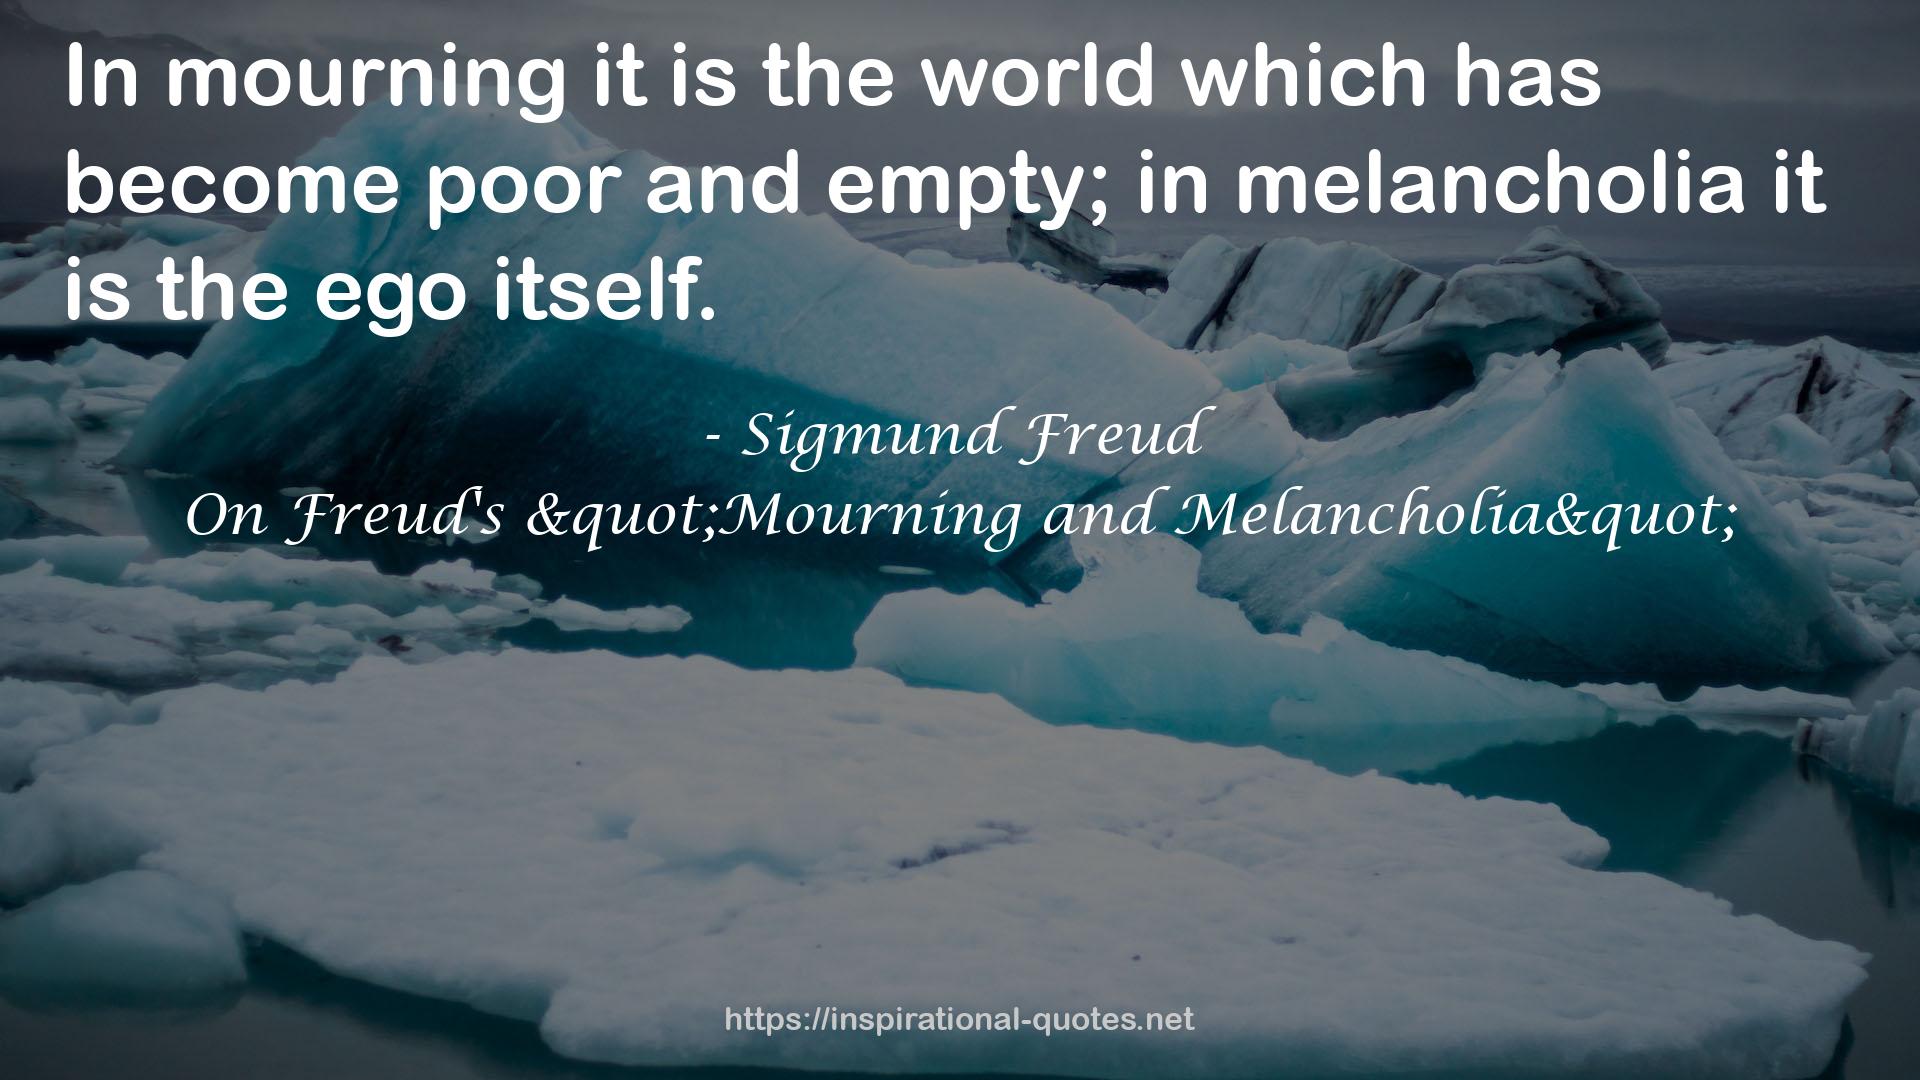 On Freud's "Mourning and Melancholia" QUOTES